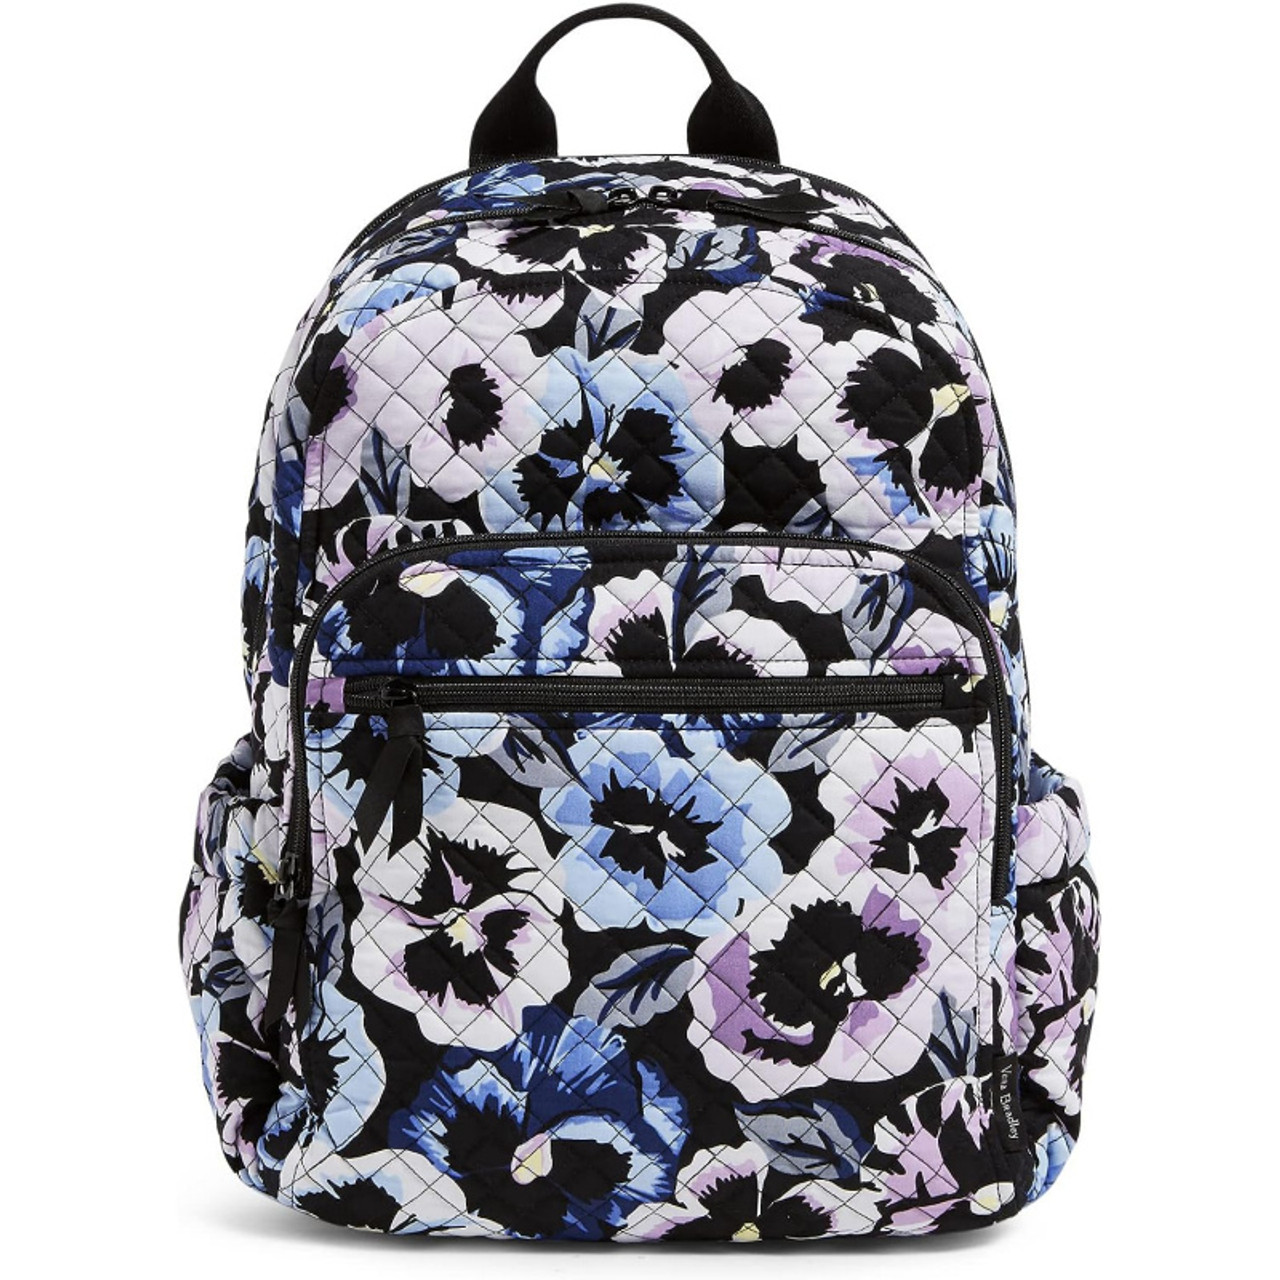 Vera Bradley Backpack on Sale at Bell Racquet Sports